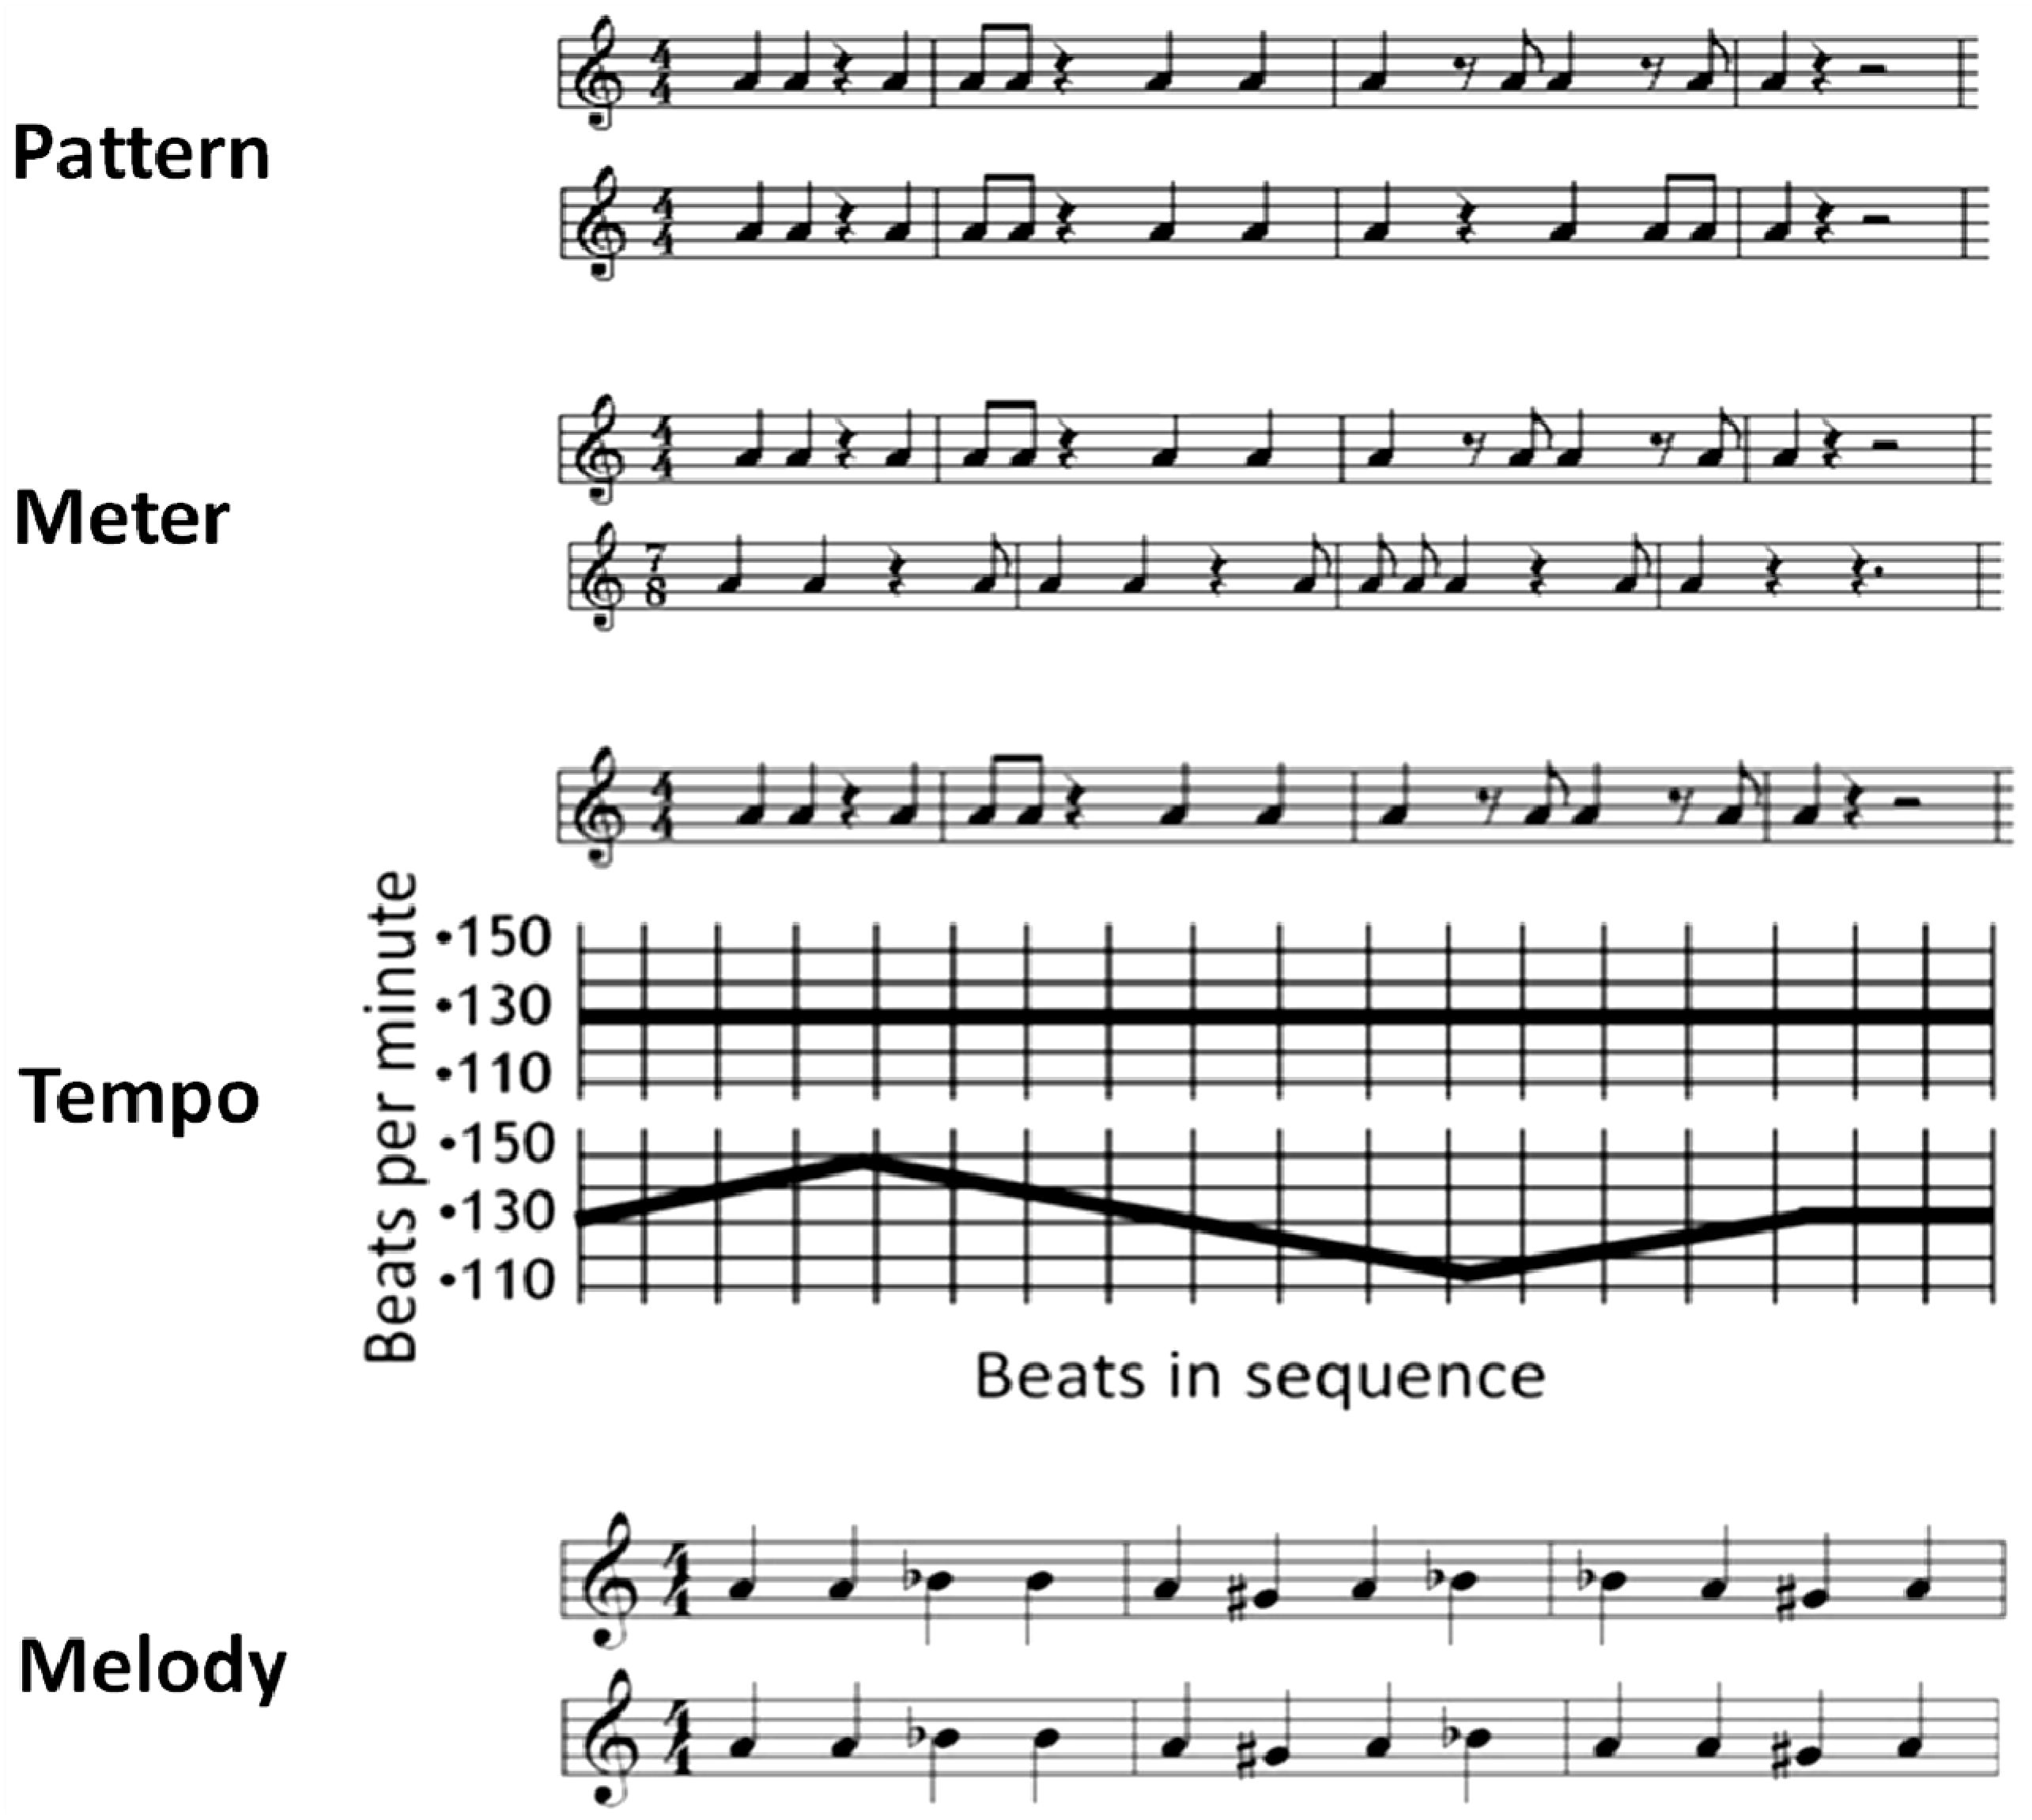 GIA Publications - Instrument Timbre Preference Test - Kit